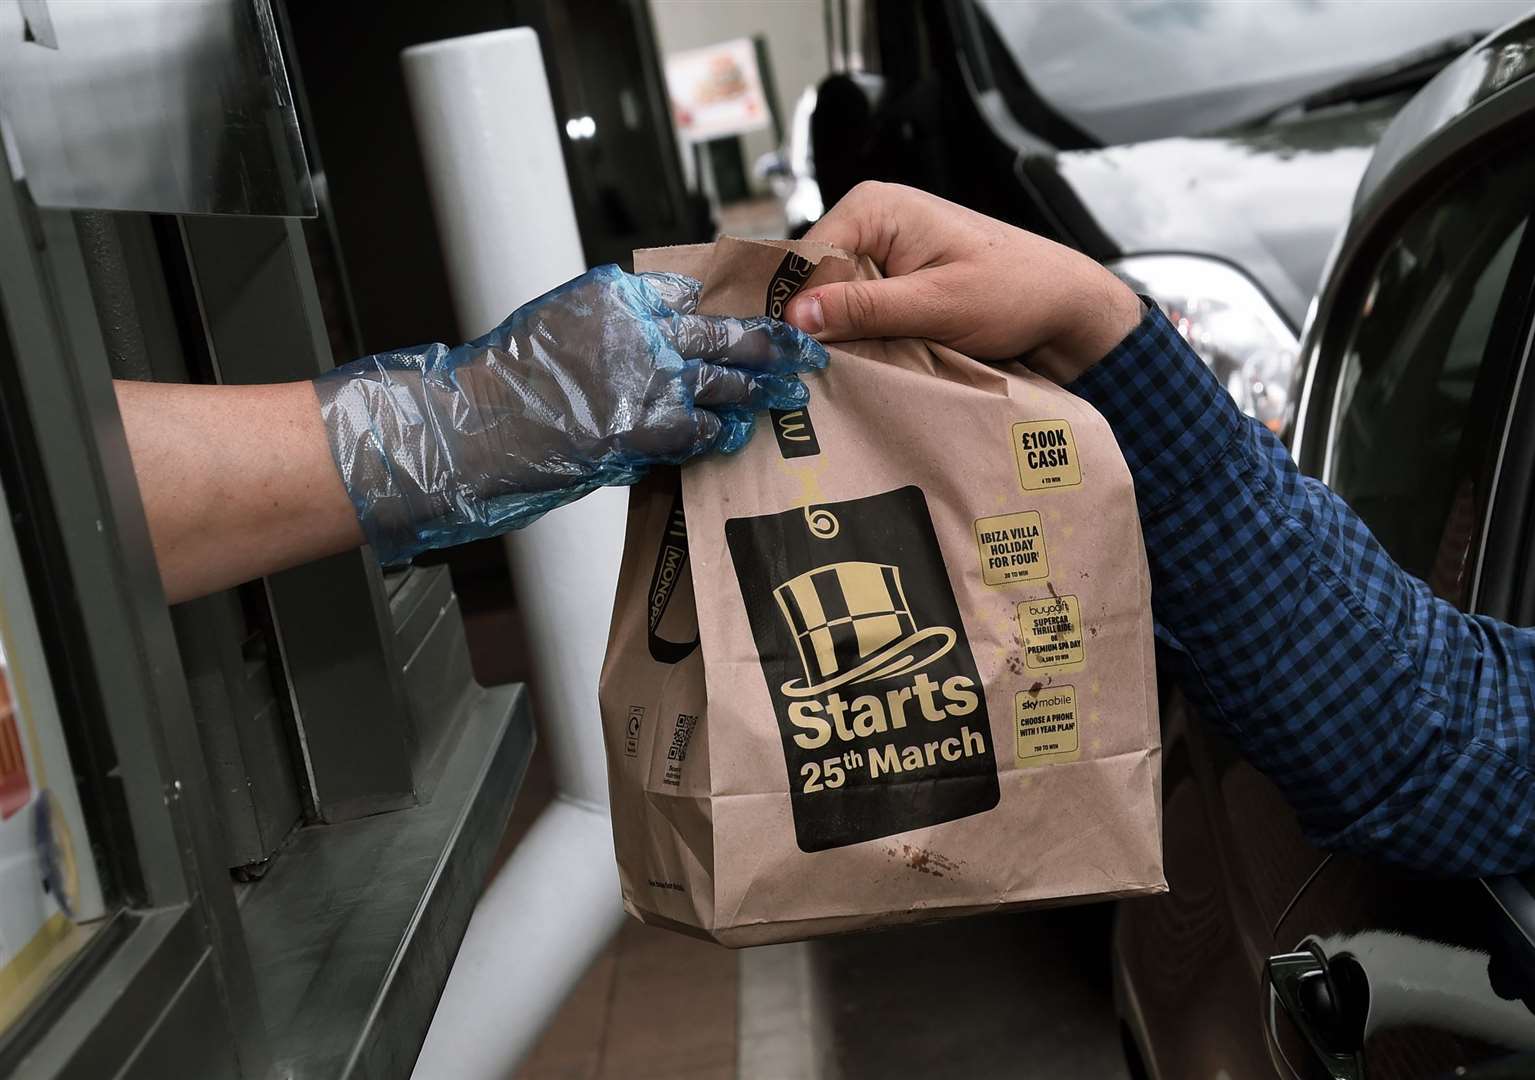 A month ago McDonald's made the voluntary decision to temporarily close walk-in takeaway, only offering drive-thru and delivery